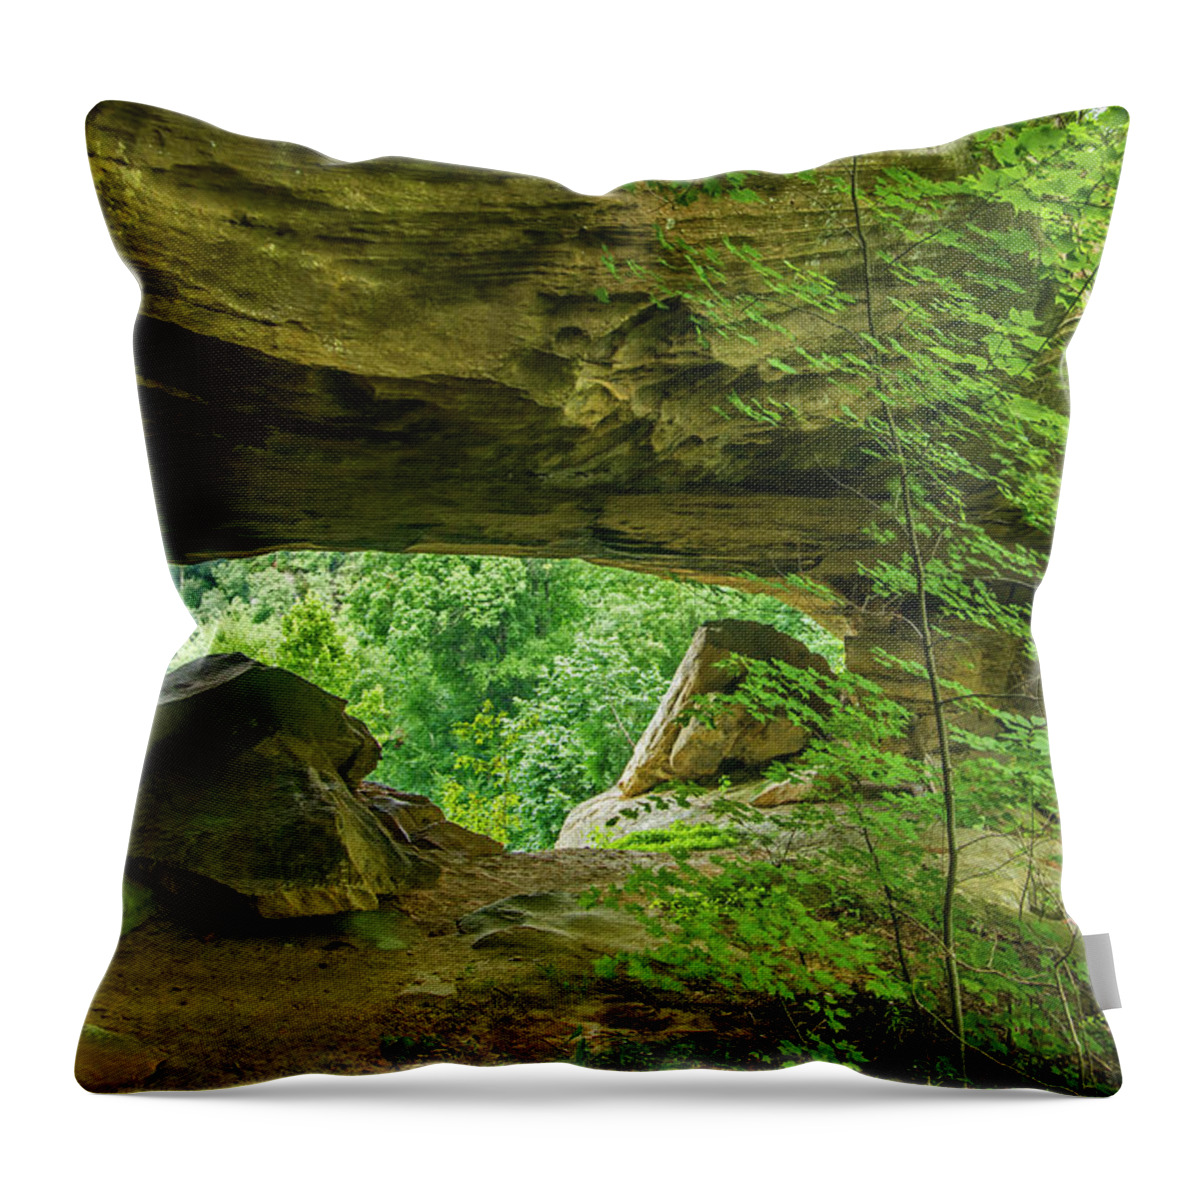 Mill Creek Lake Throw Pillow featuring the photograph White Branch Arch by Ulrich Burkhalter